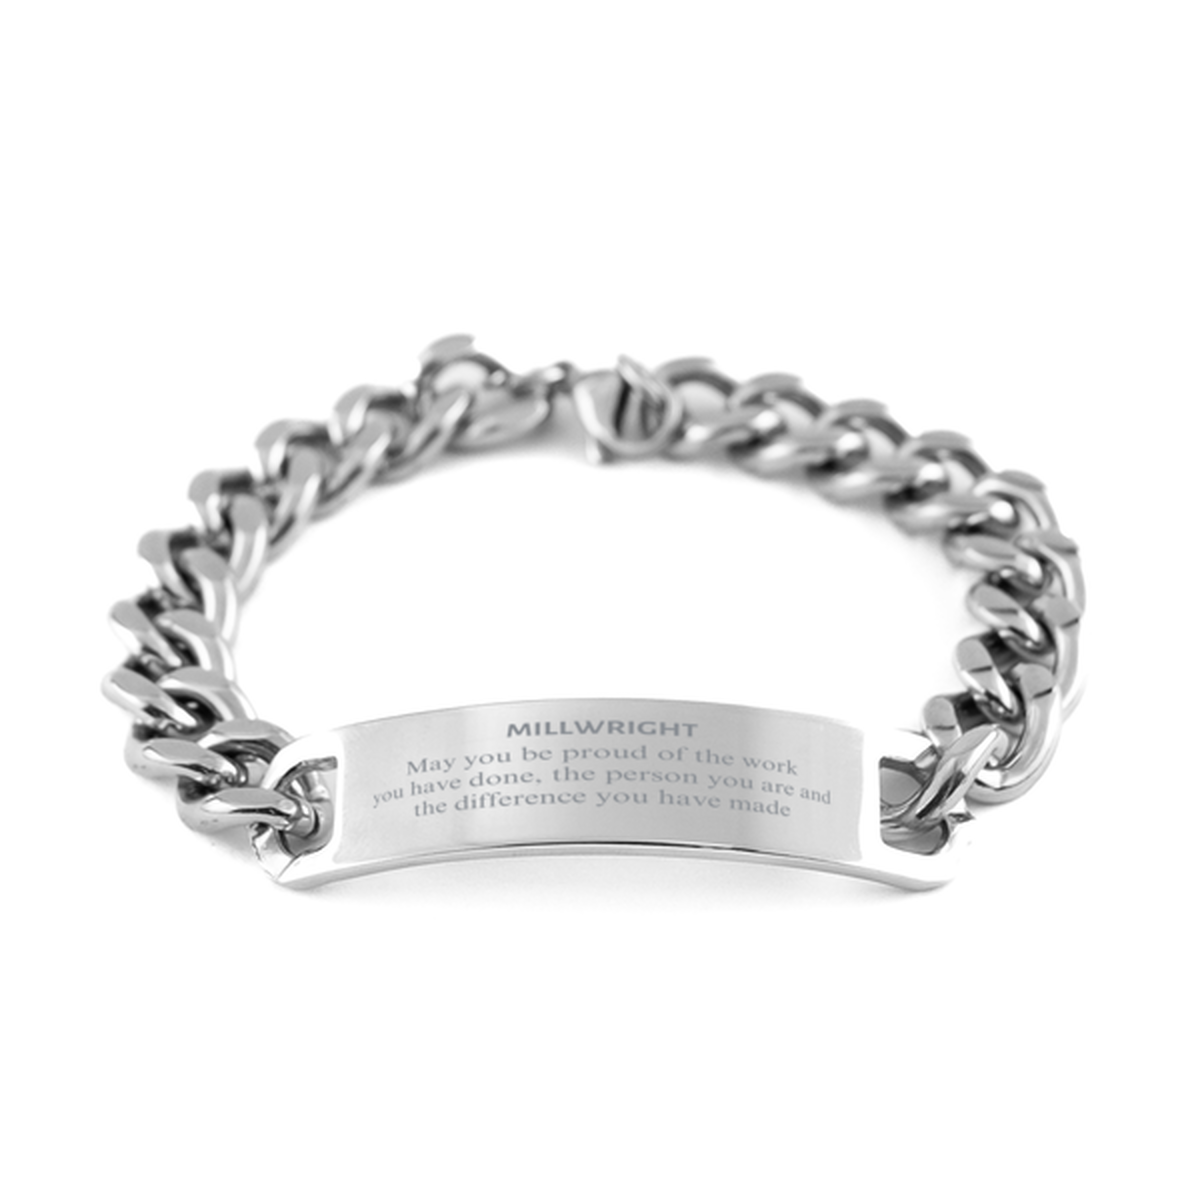 Millwright May you be proud of the work you have done, Retirement Millwright Cuban Chain Stainless Steel Bracelet for Colleague Appreciation Gifts Amazing for Millwright